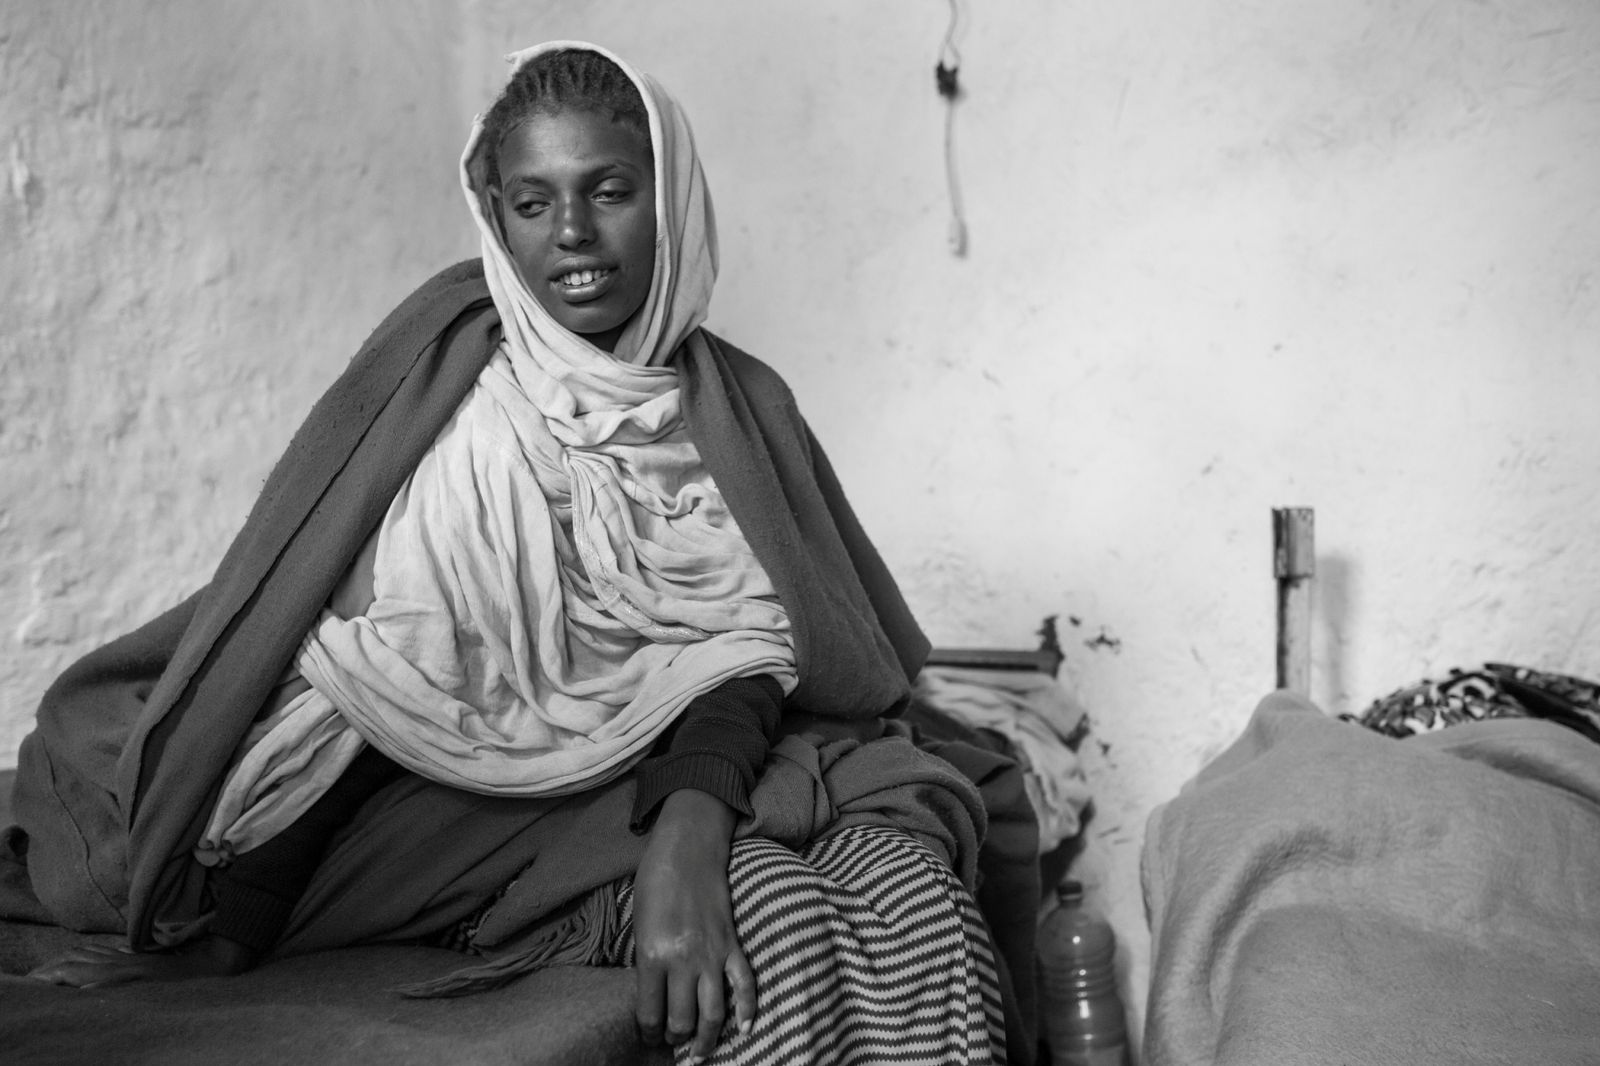 © Nathalie Bertrams - Image from the Out of sight: the Ethiopian girls struggling for visibility photography project